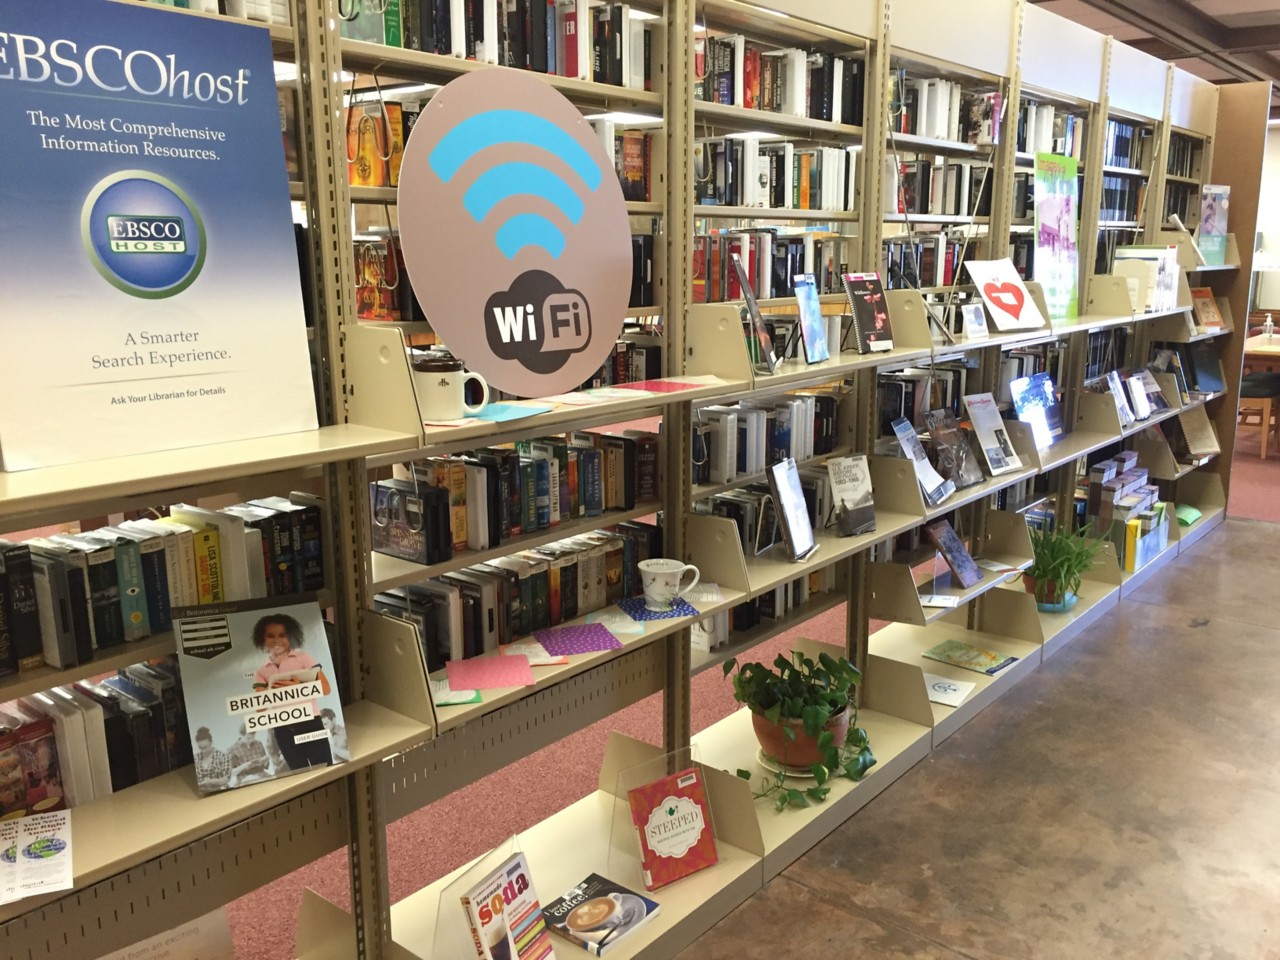 Shelves of Library Offerings including EBSCO and Wifi